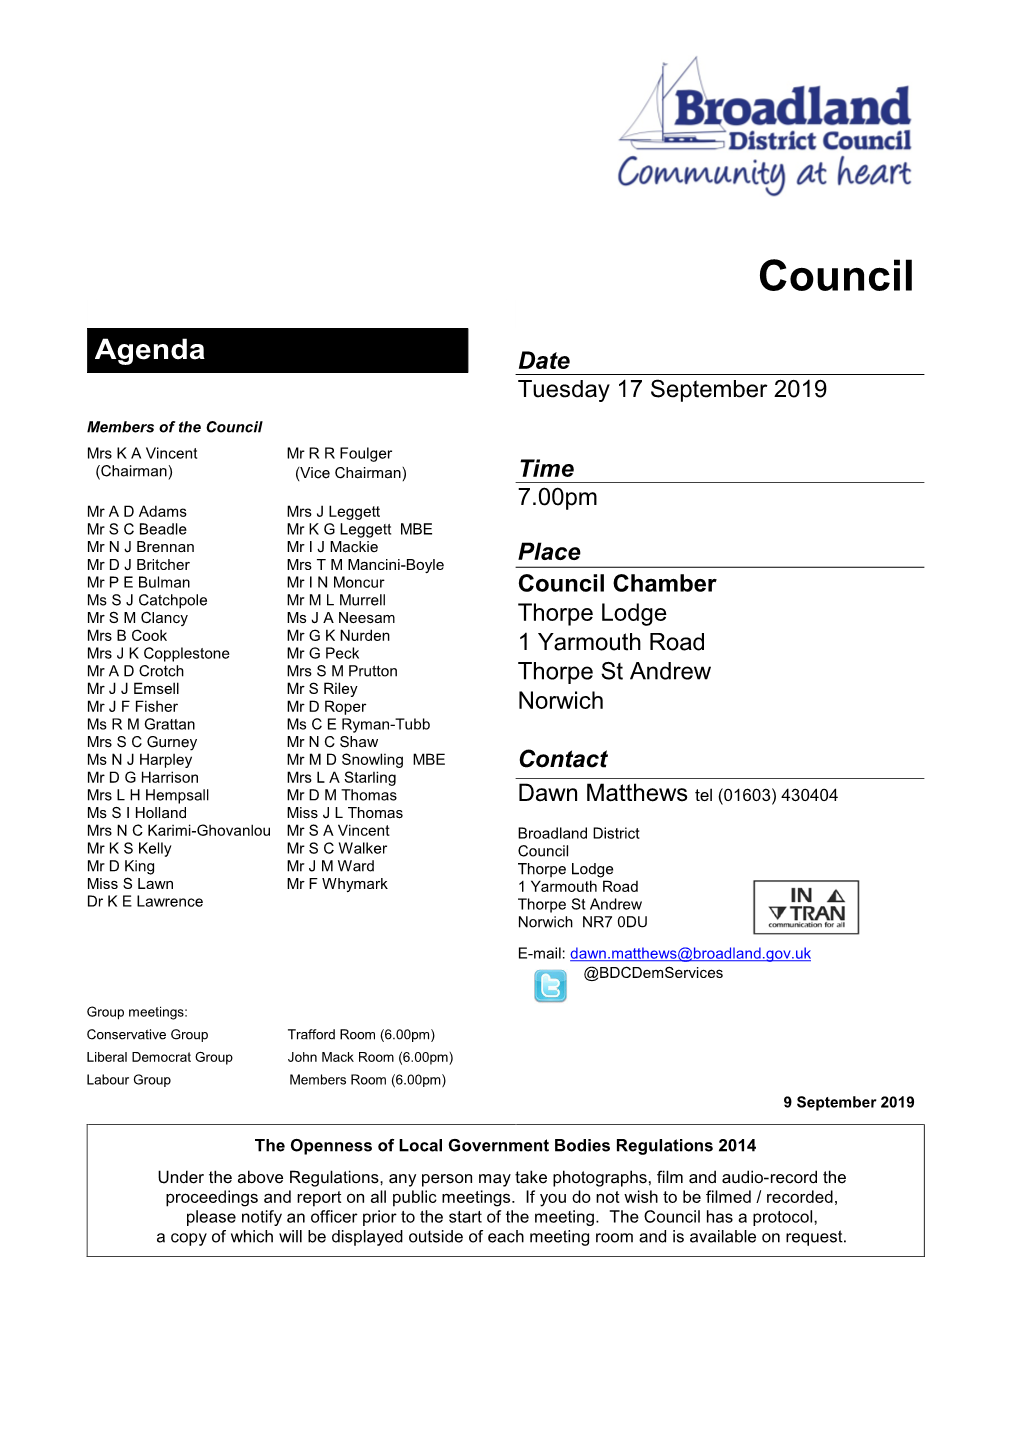 Council Papers